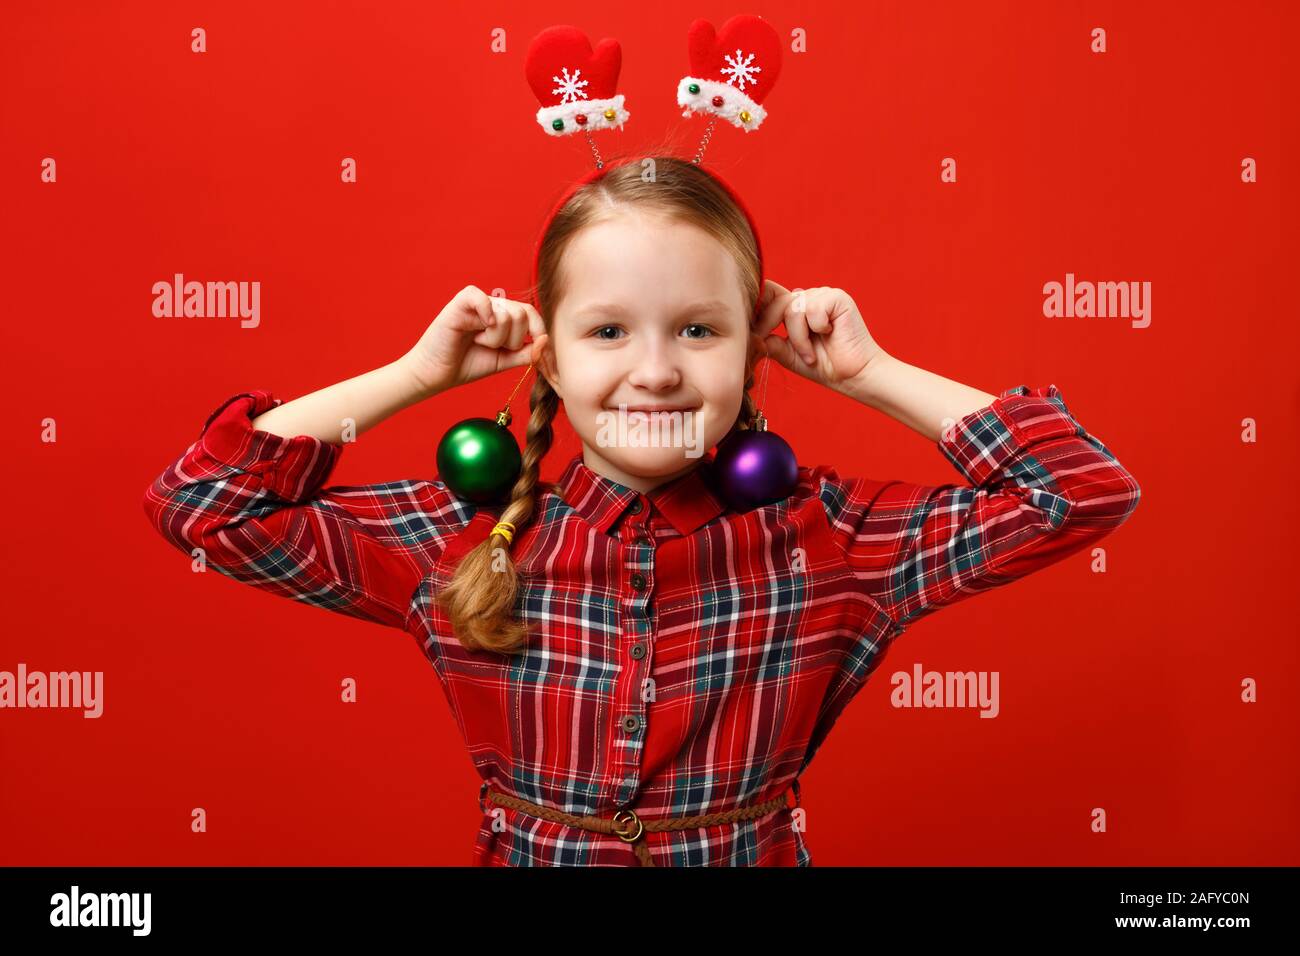 Funny happy little girl with earring christmas ball decoration. A child in a red dress and mittens headband on a colored background. Stock Photo